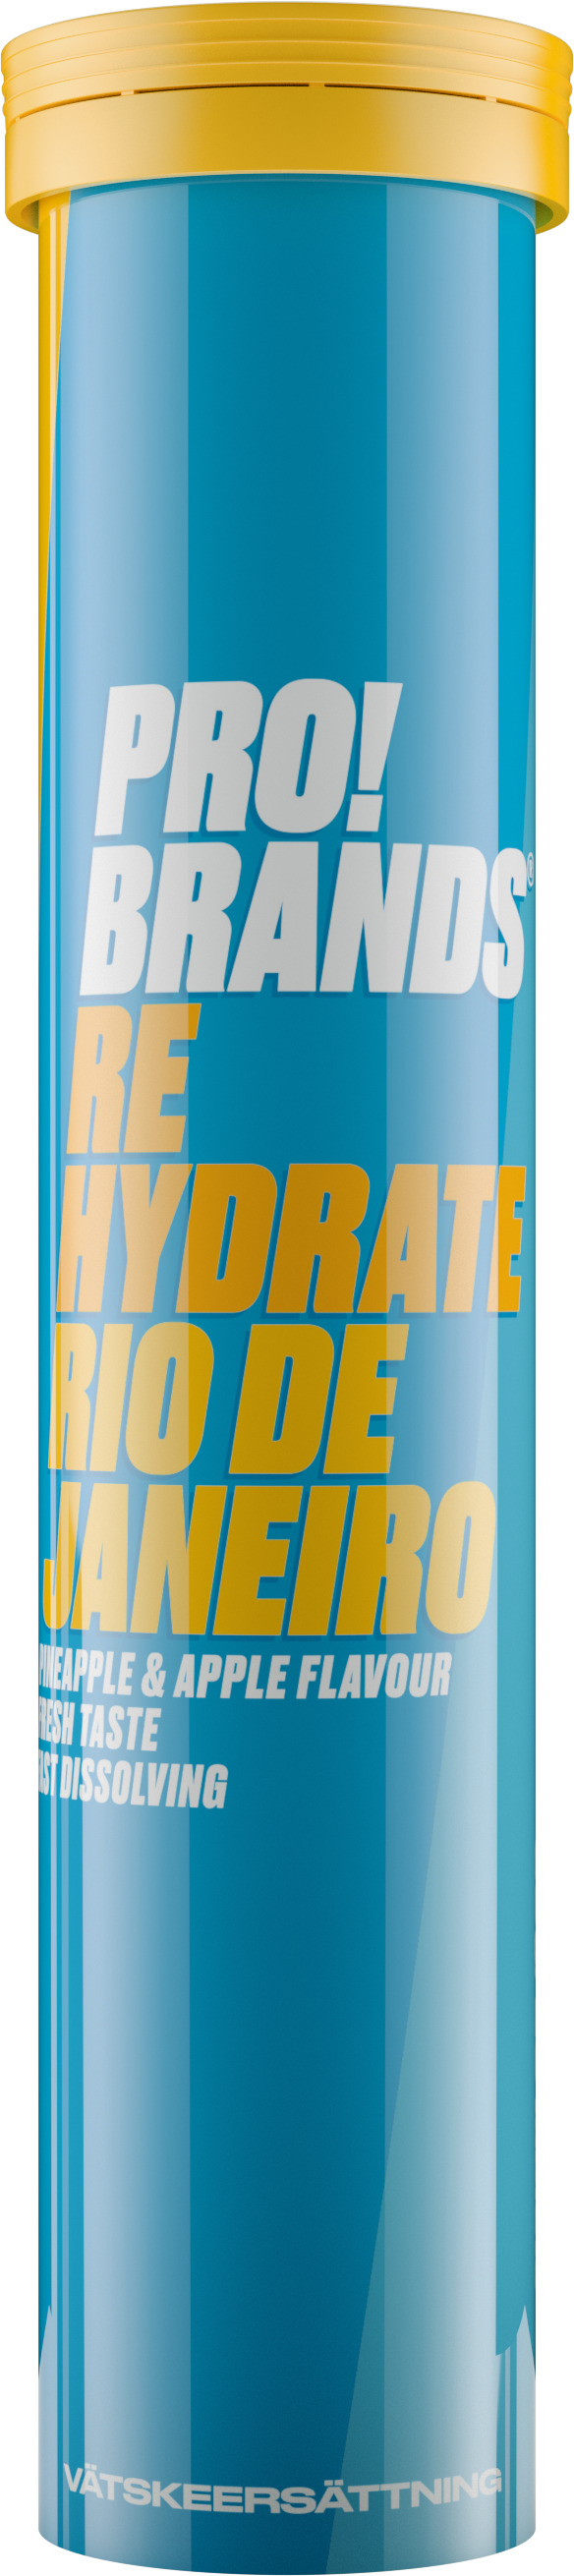 ProBrands Rehydrate Effervescent Rio 20 tabletter